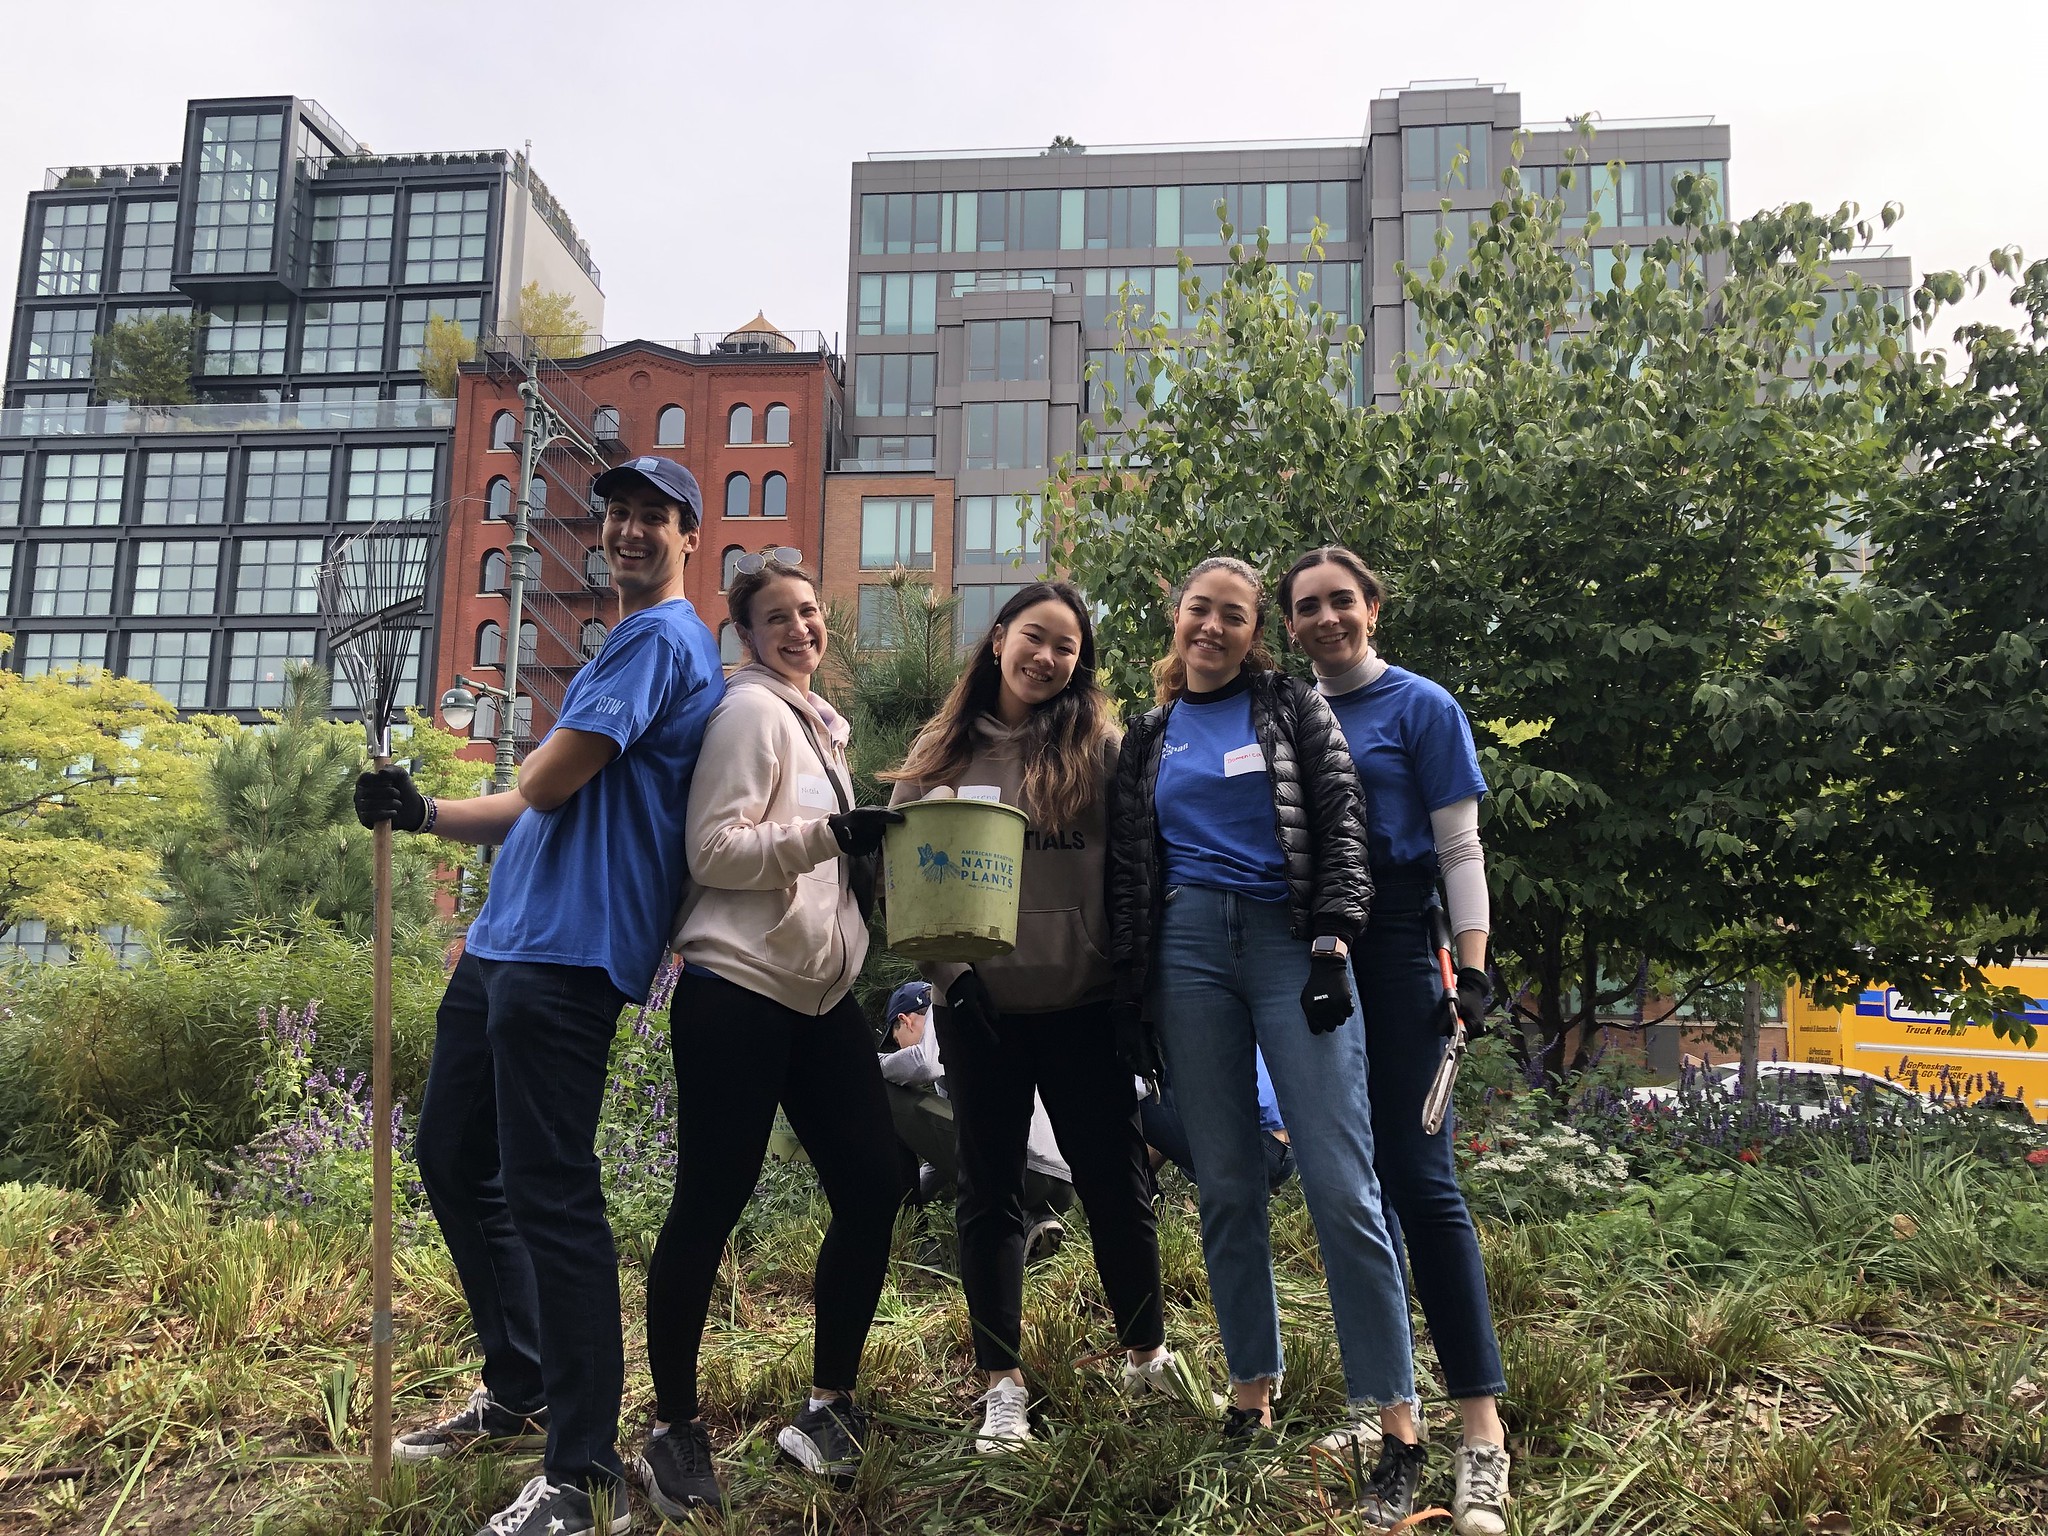 Volunteers pose with gardening supplies in Hudson River Park